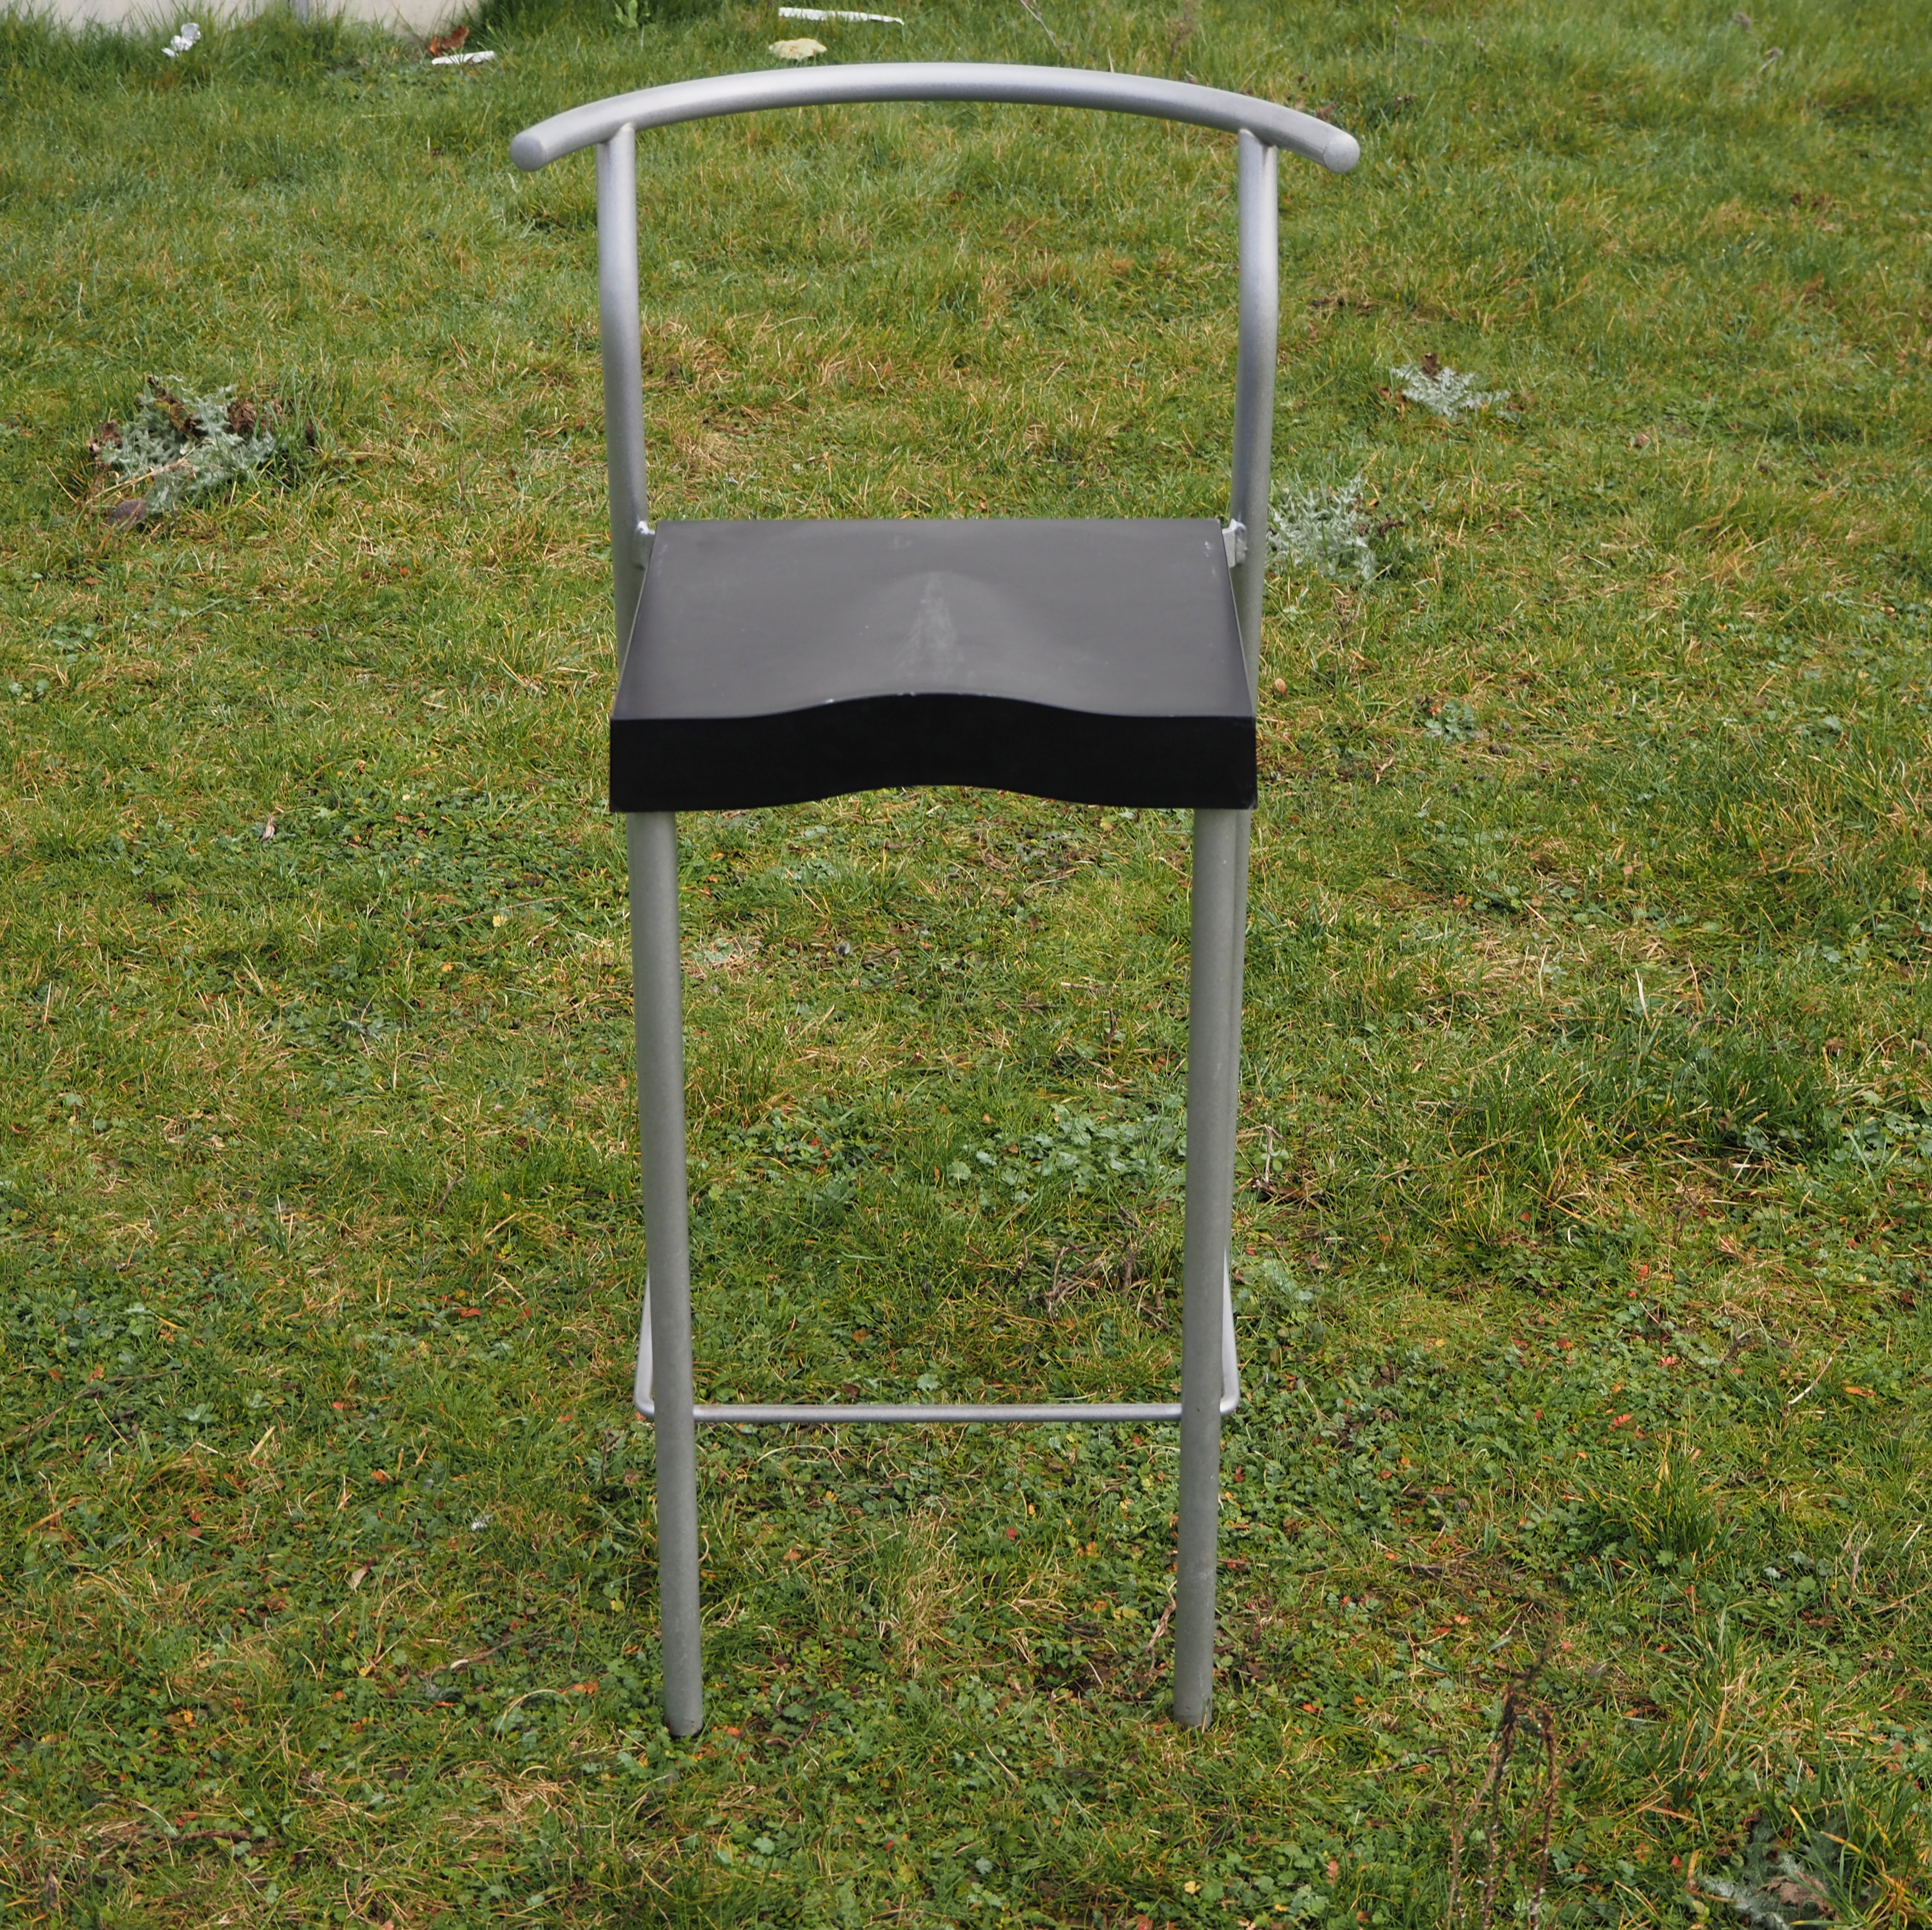 Counter chair 'Hi-Glob' by Philippe Starck for Kartell (ca. 1988) - Black